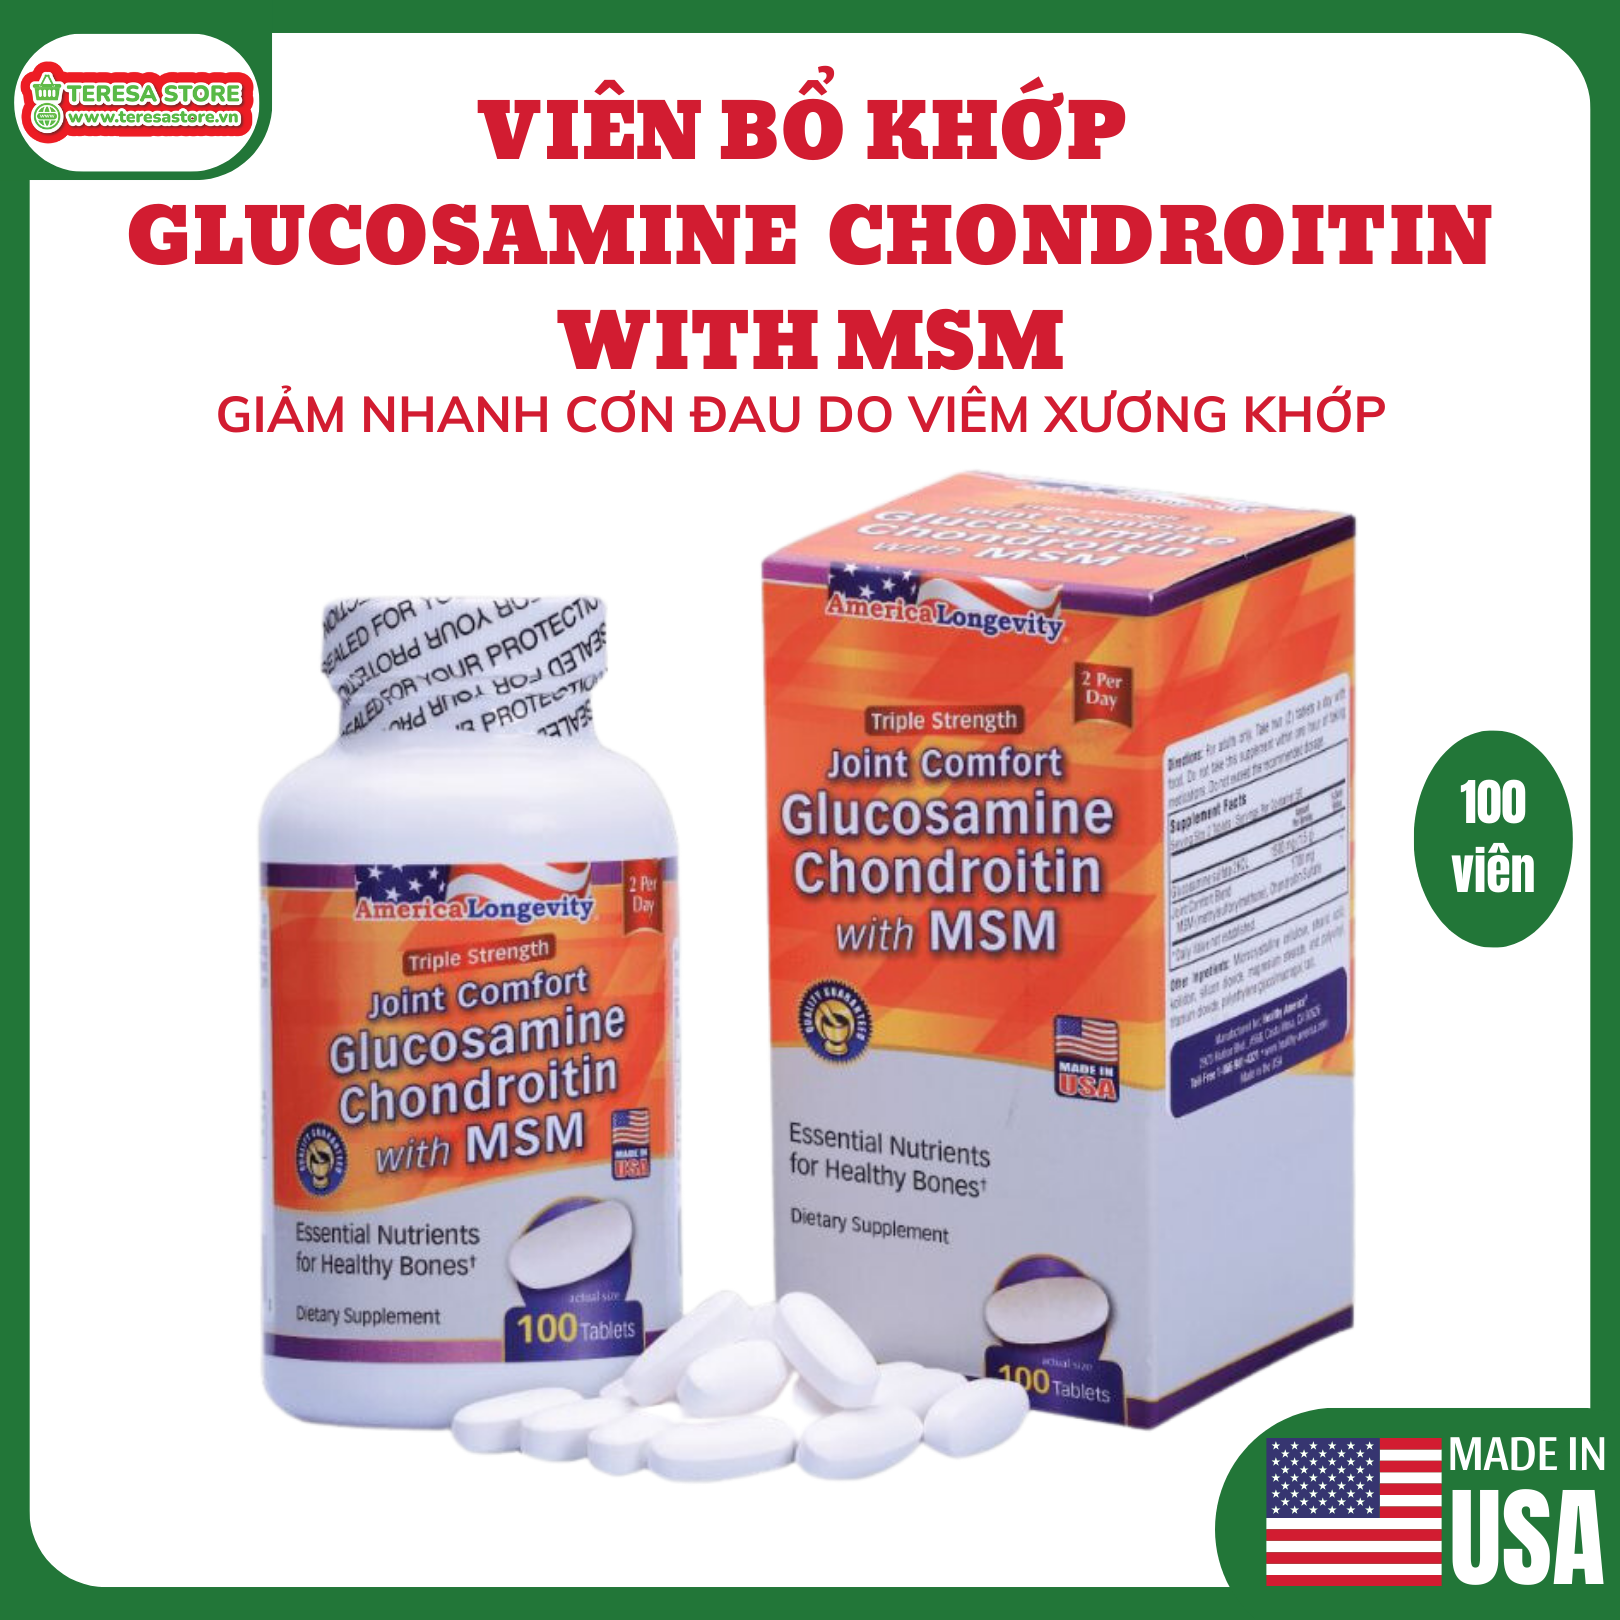 Glucosamine Chondroitin with MSM tablets to help reduce pain caused by